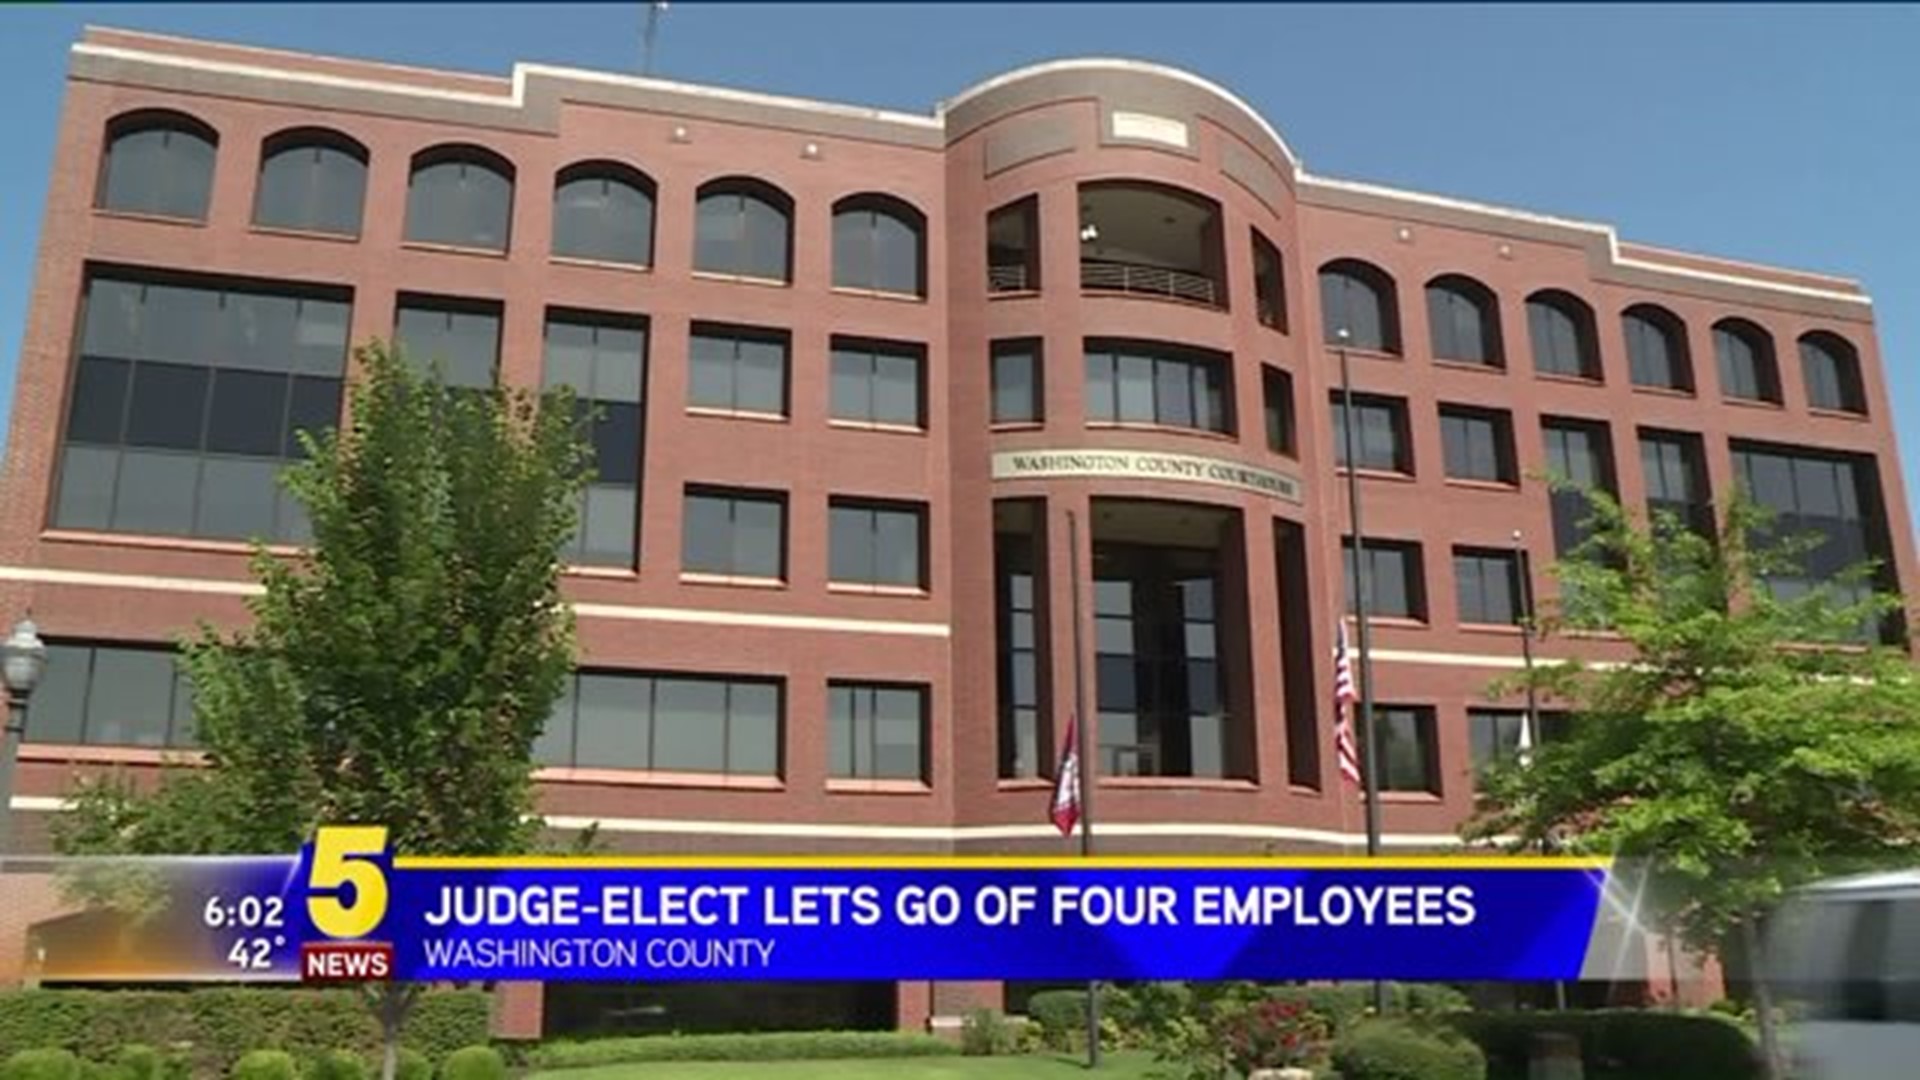 Judge-Elect Lets Go Of Four Employees